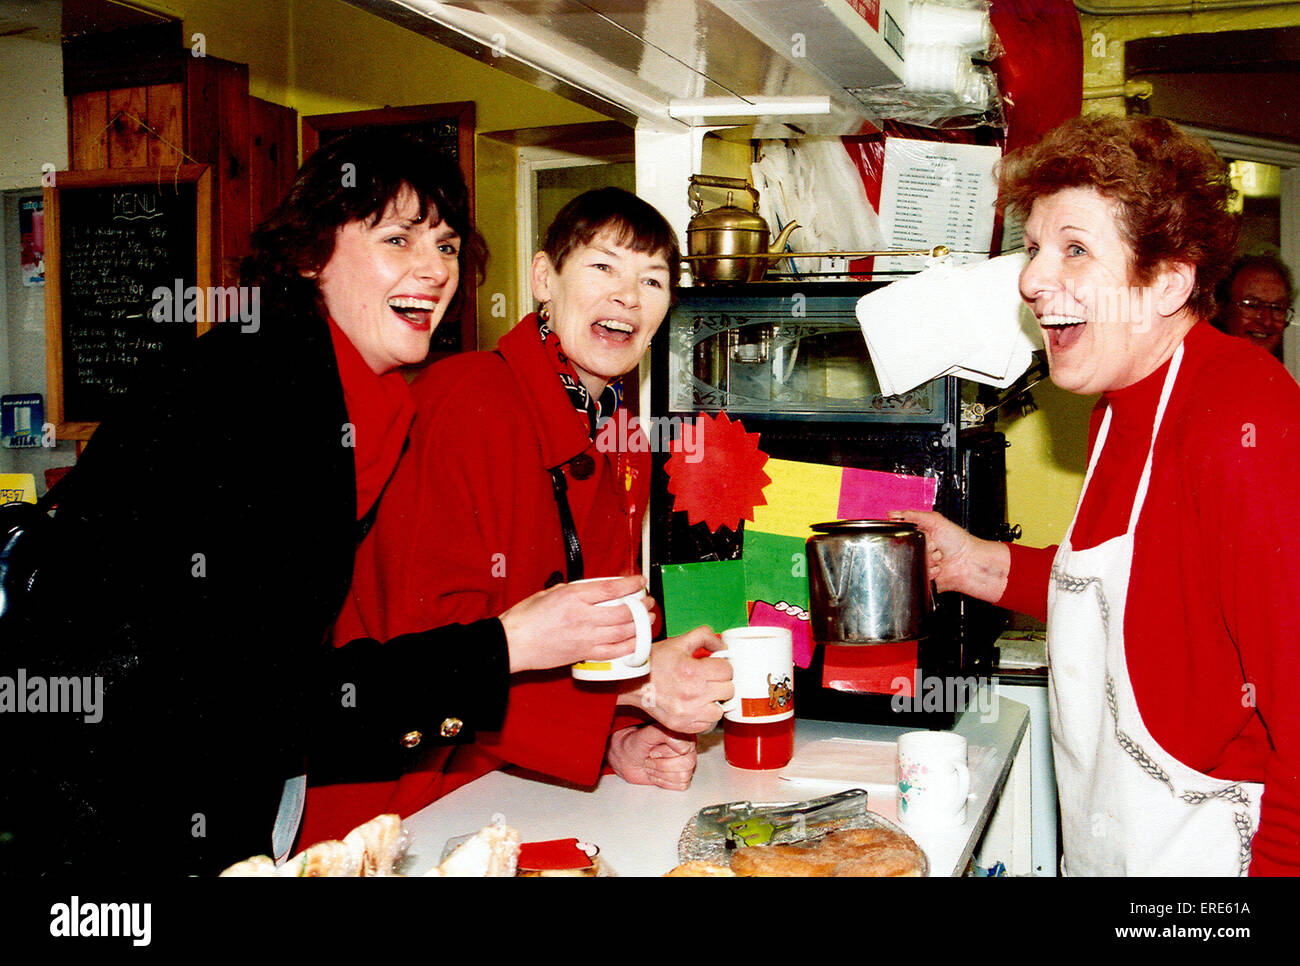 Actress and MP Glenda Jackson (centre) takes a cup of tea at Stourbridge bus station, with her on the left is former labour MP Stock Photo